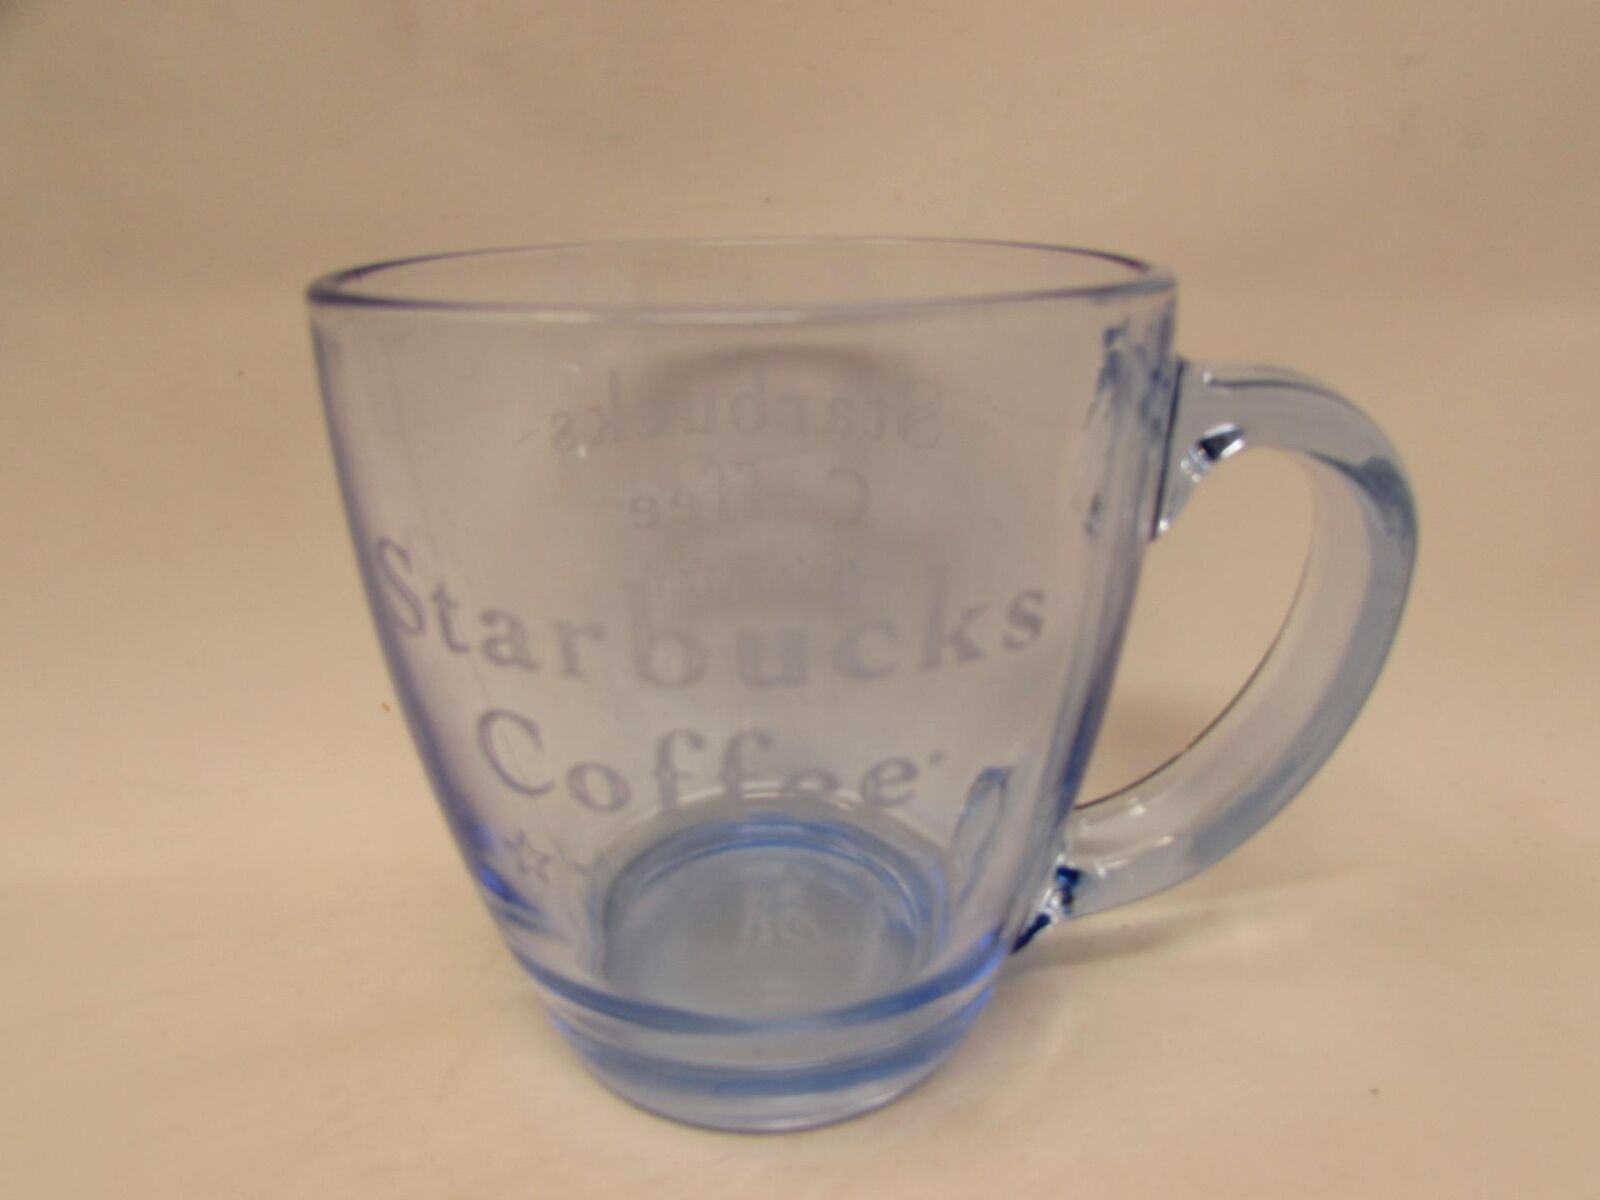 Starbucks Clear Blue Tinted Etched Glass 15.5oz Coffee Mug Cup Barista